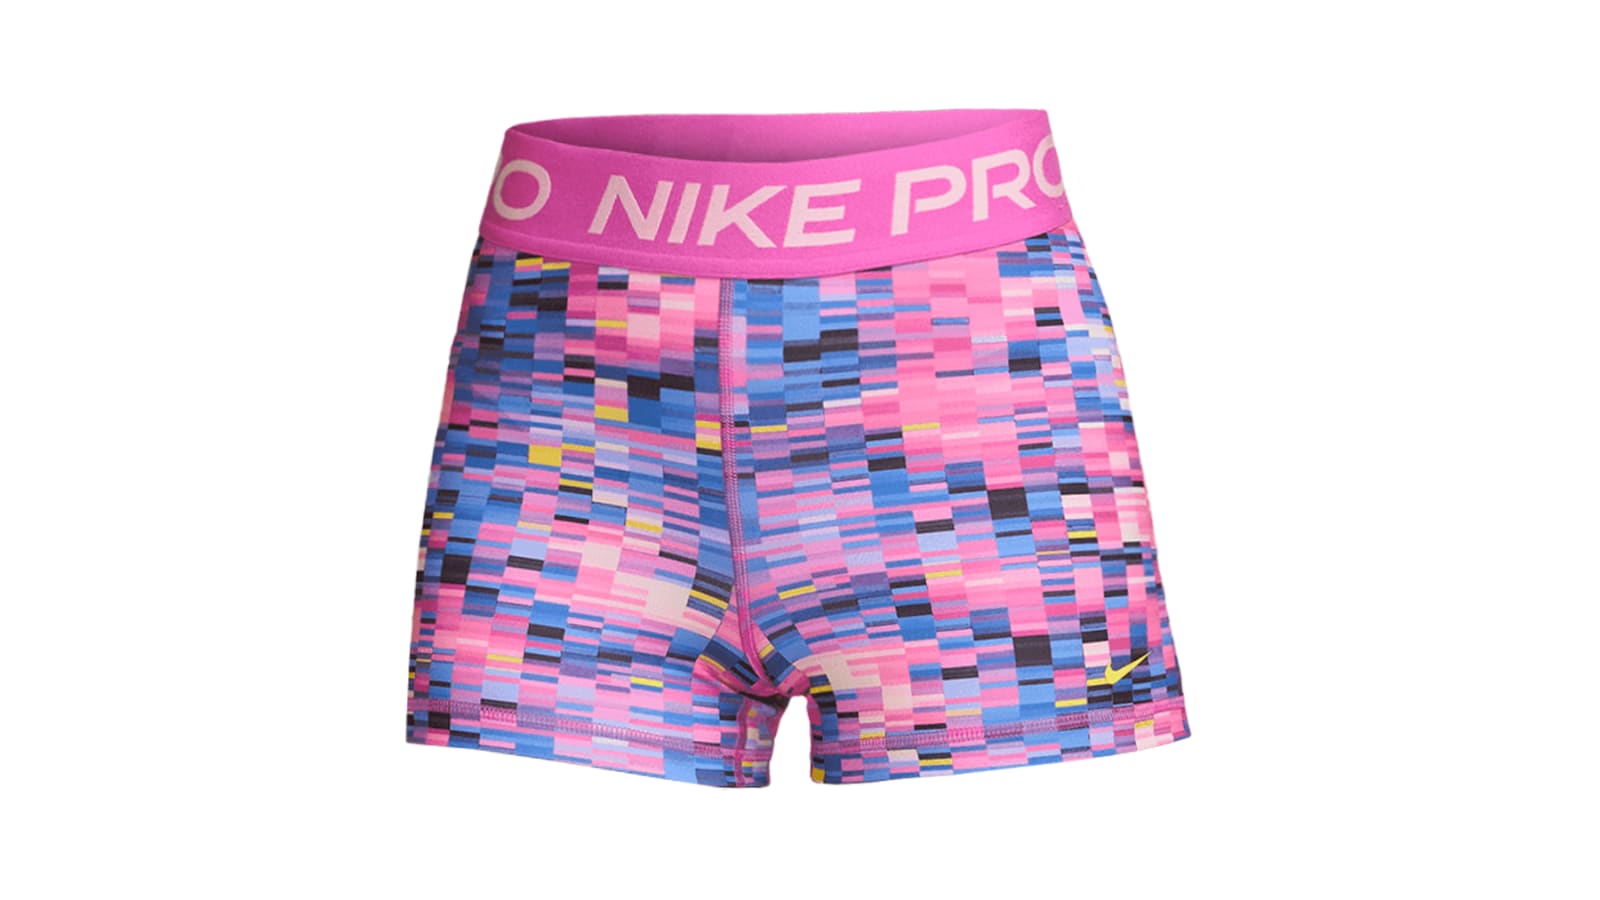 Women's Nike Shorts: Shop New Bottoms for Your Active Wardrobe